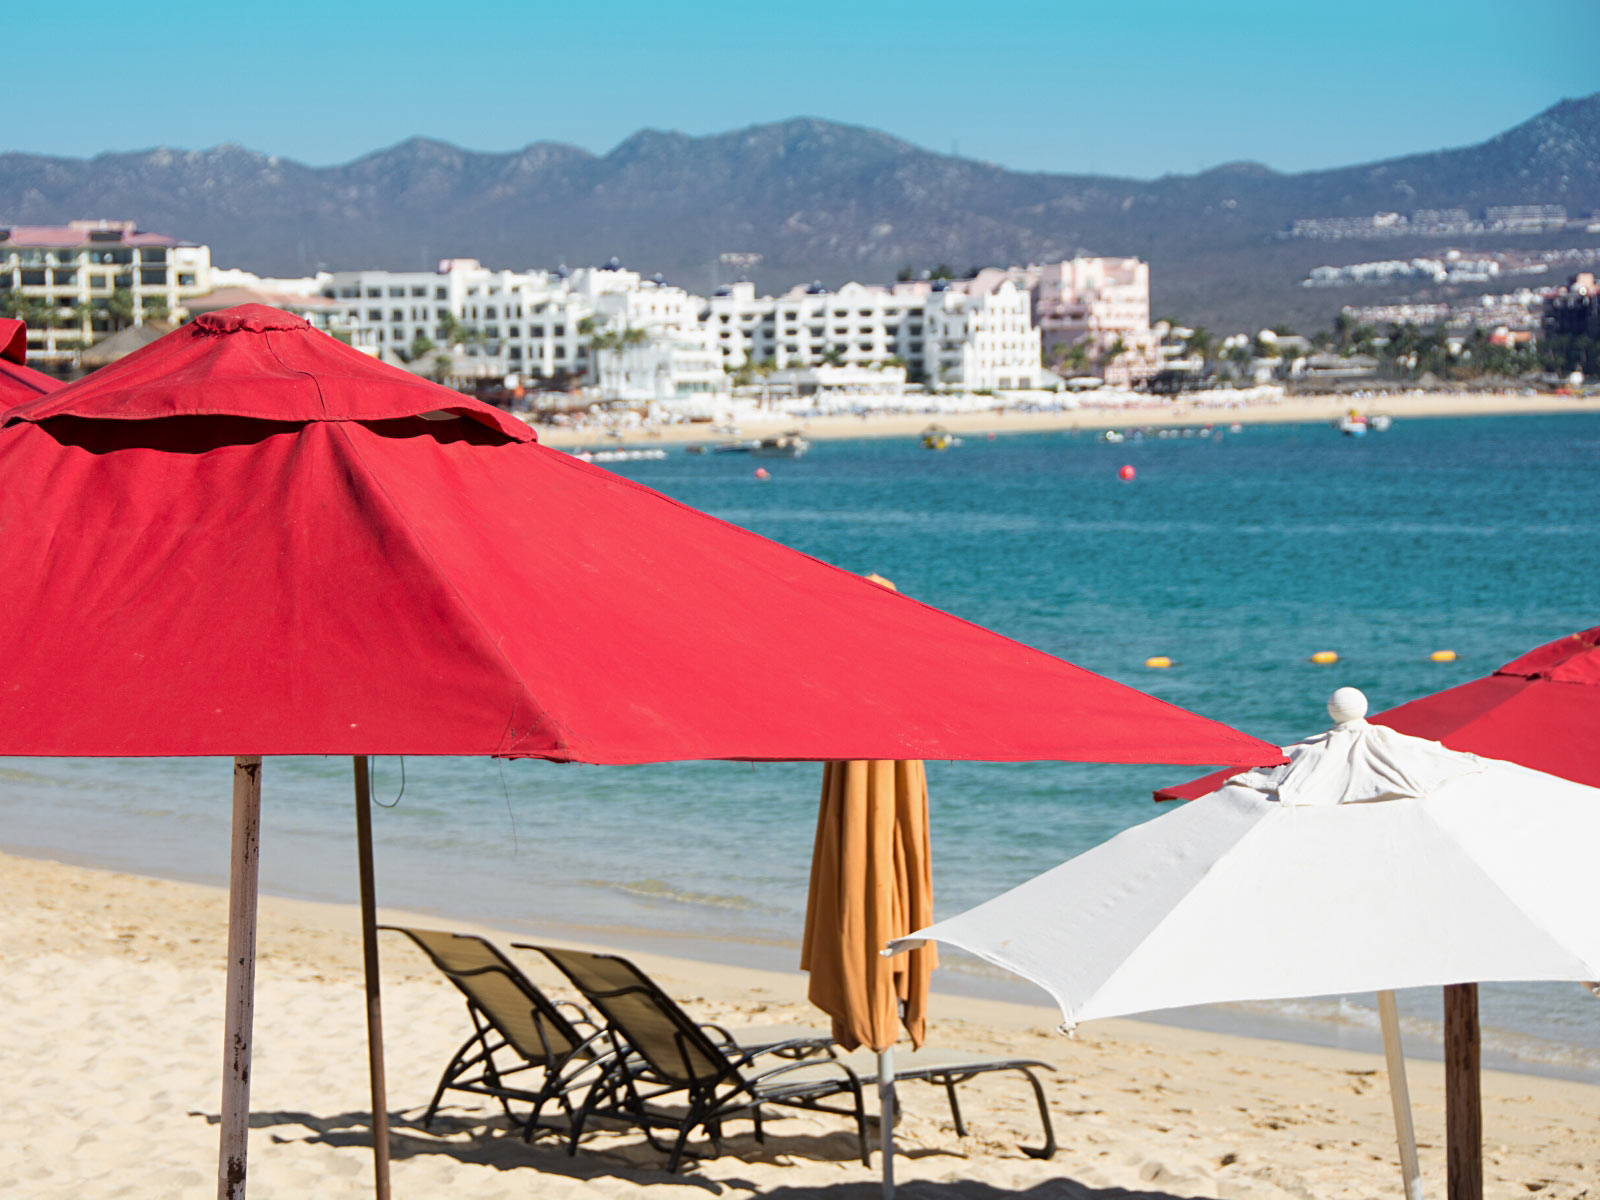 Red umbrellas by beach chairs on Medano Beach in Cabo San Lucas